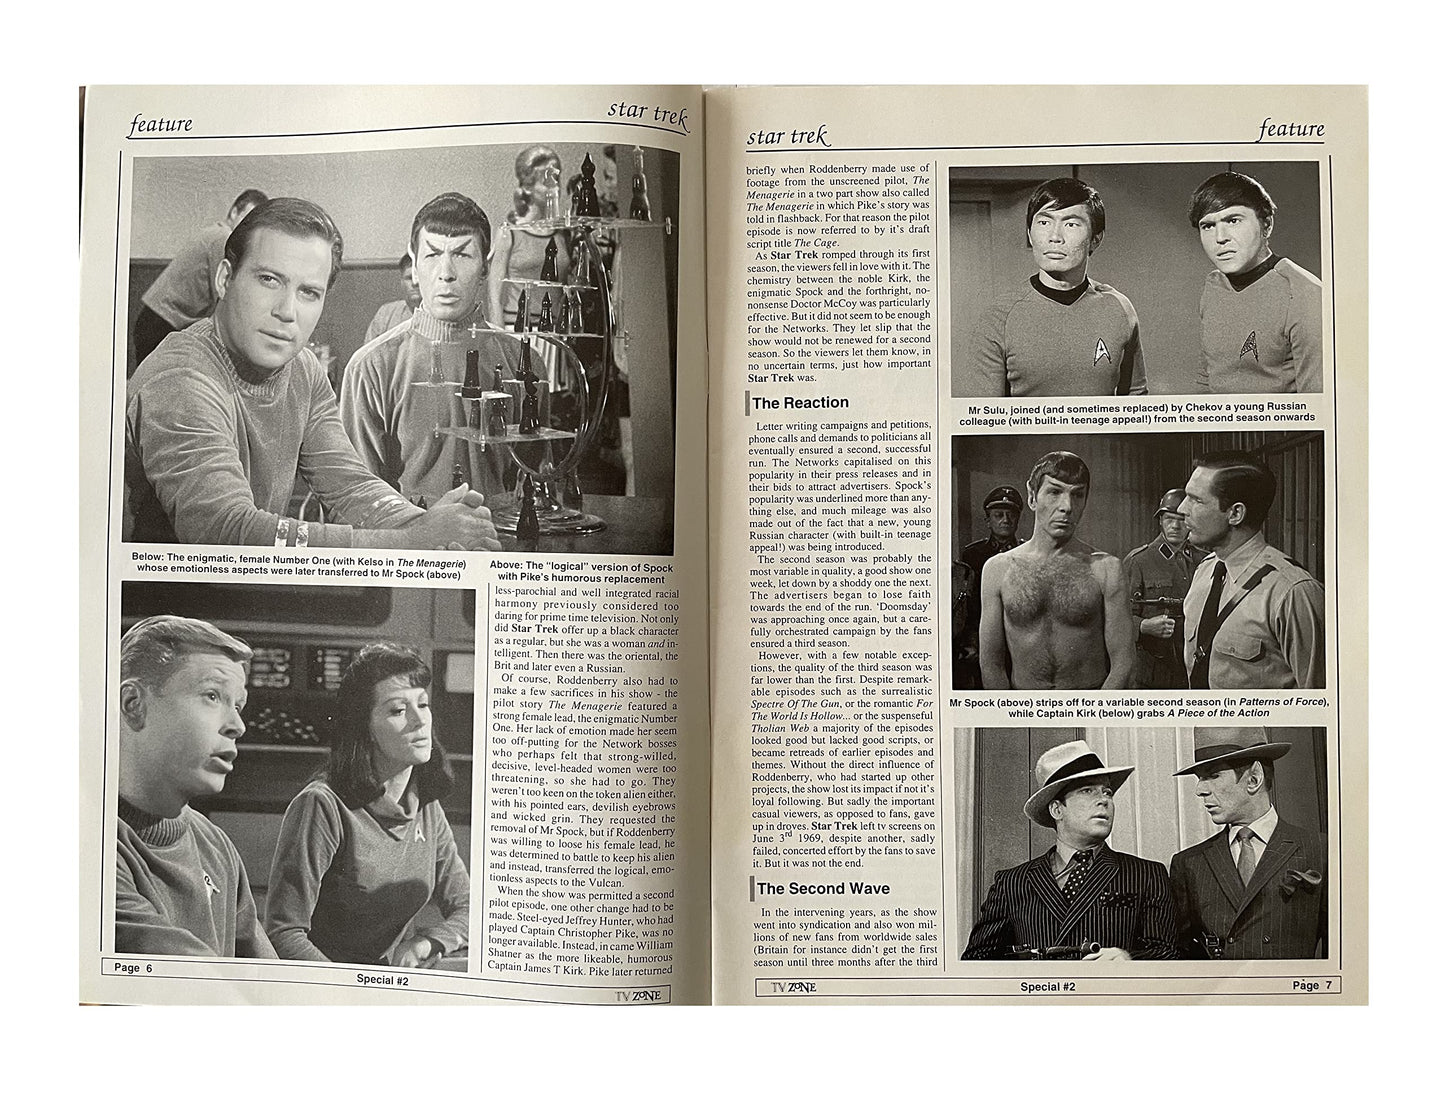 Vintage TV Zone - The Magazine Of Cult Television Special No. 2 - Star Trek 25th Anniversary Magazine - Brand New Shop Stock Room Find